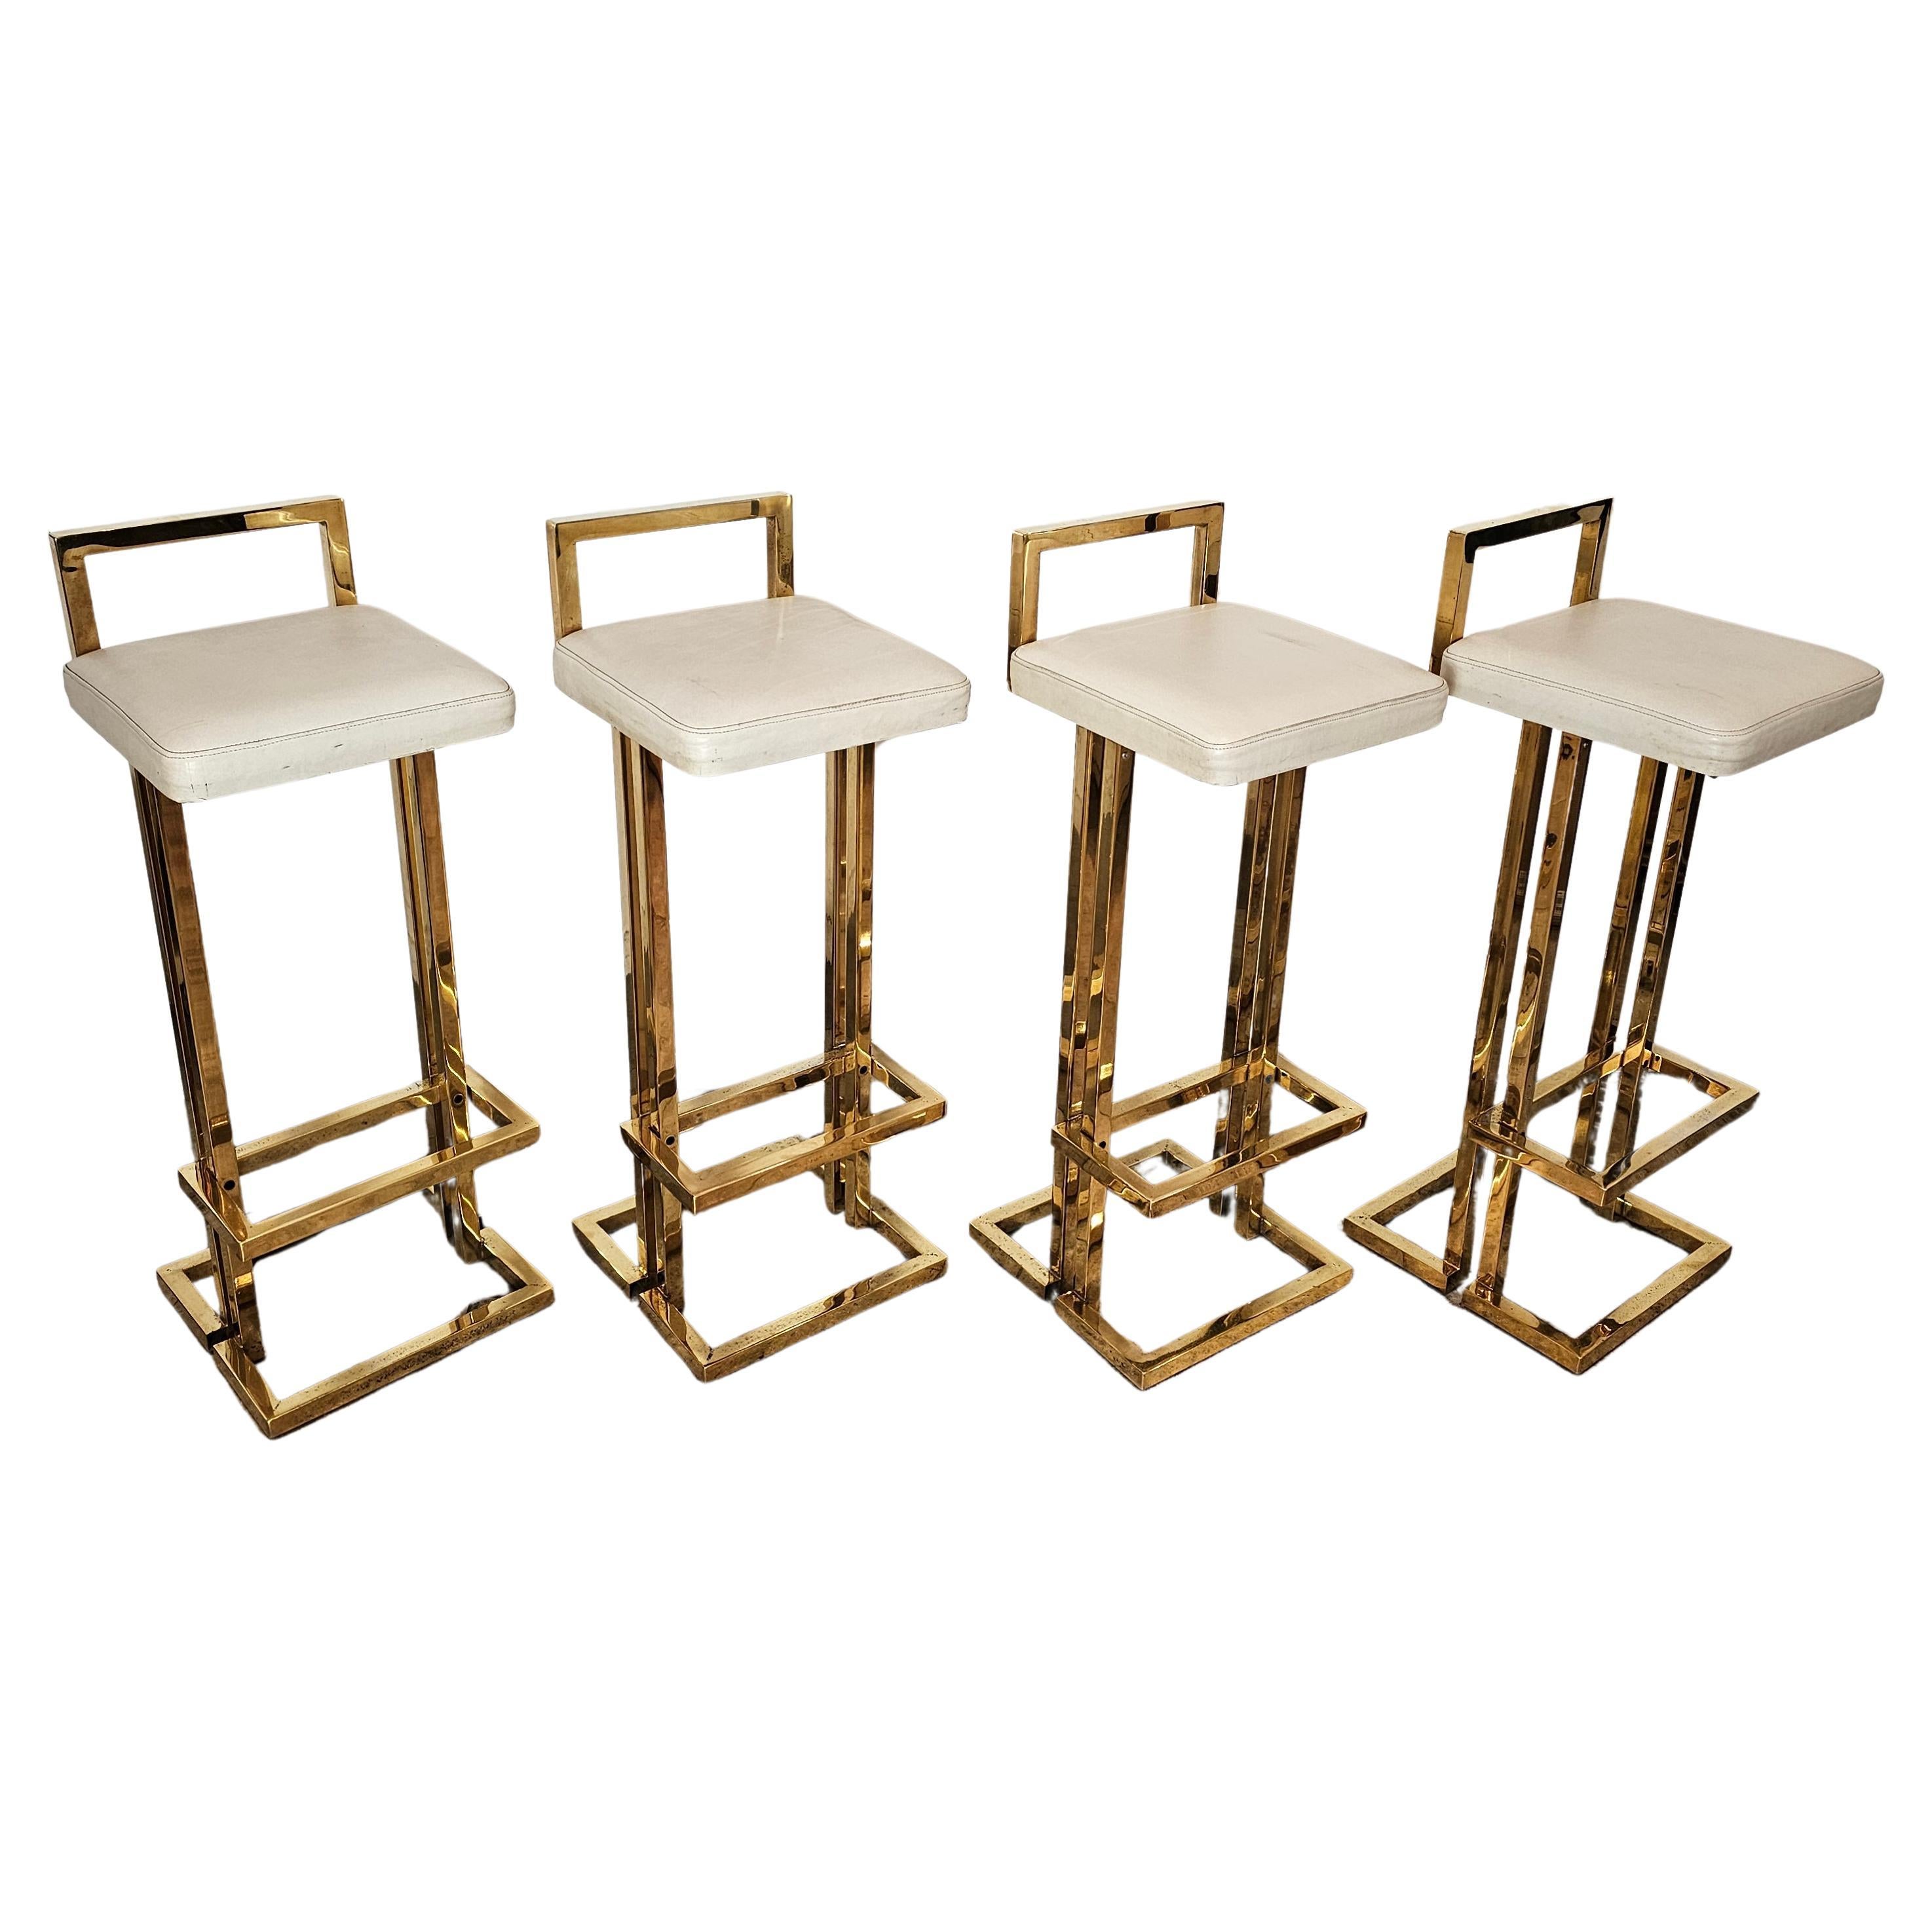 Set of 4 Bar Stools in the Style of "Maison Jansen"